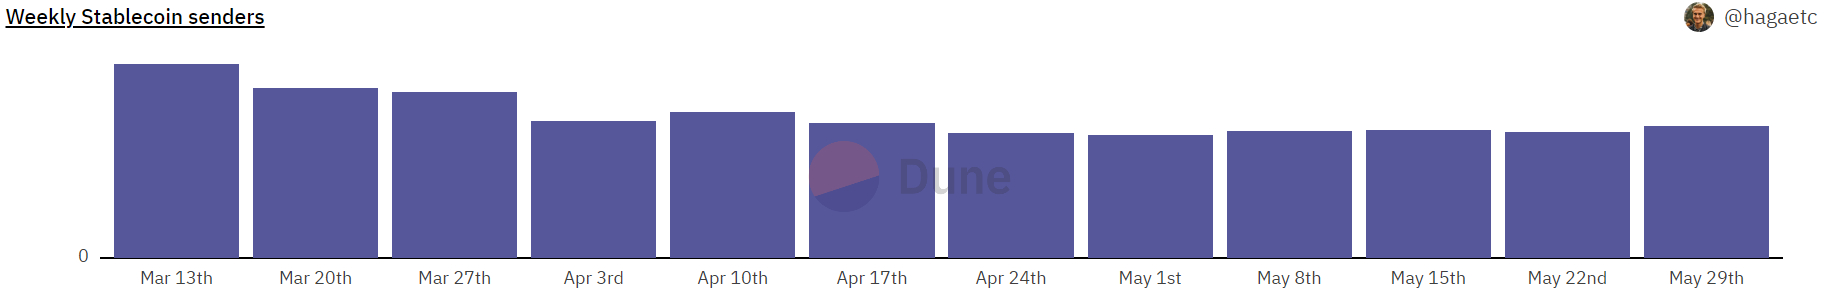 A graph showing the number of weekly stablecoin senders from March until May 2023.